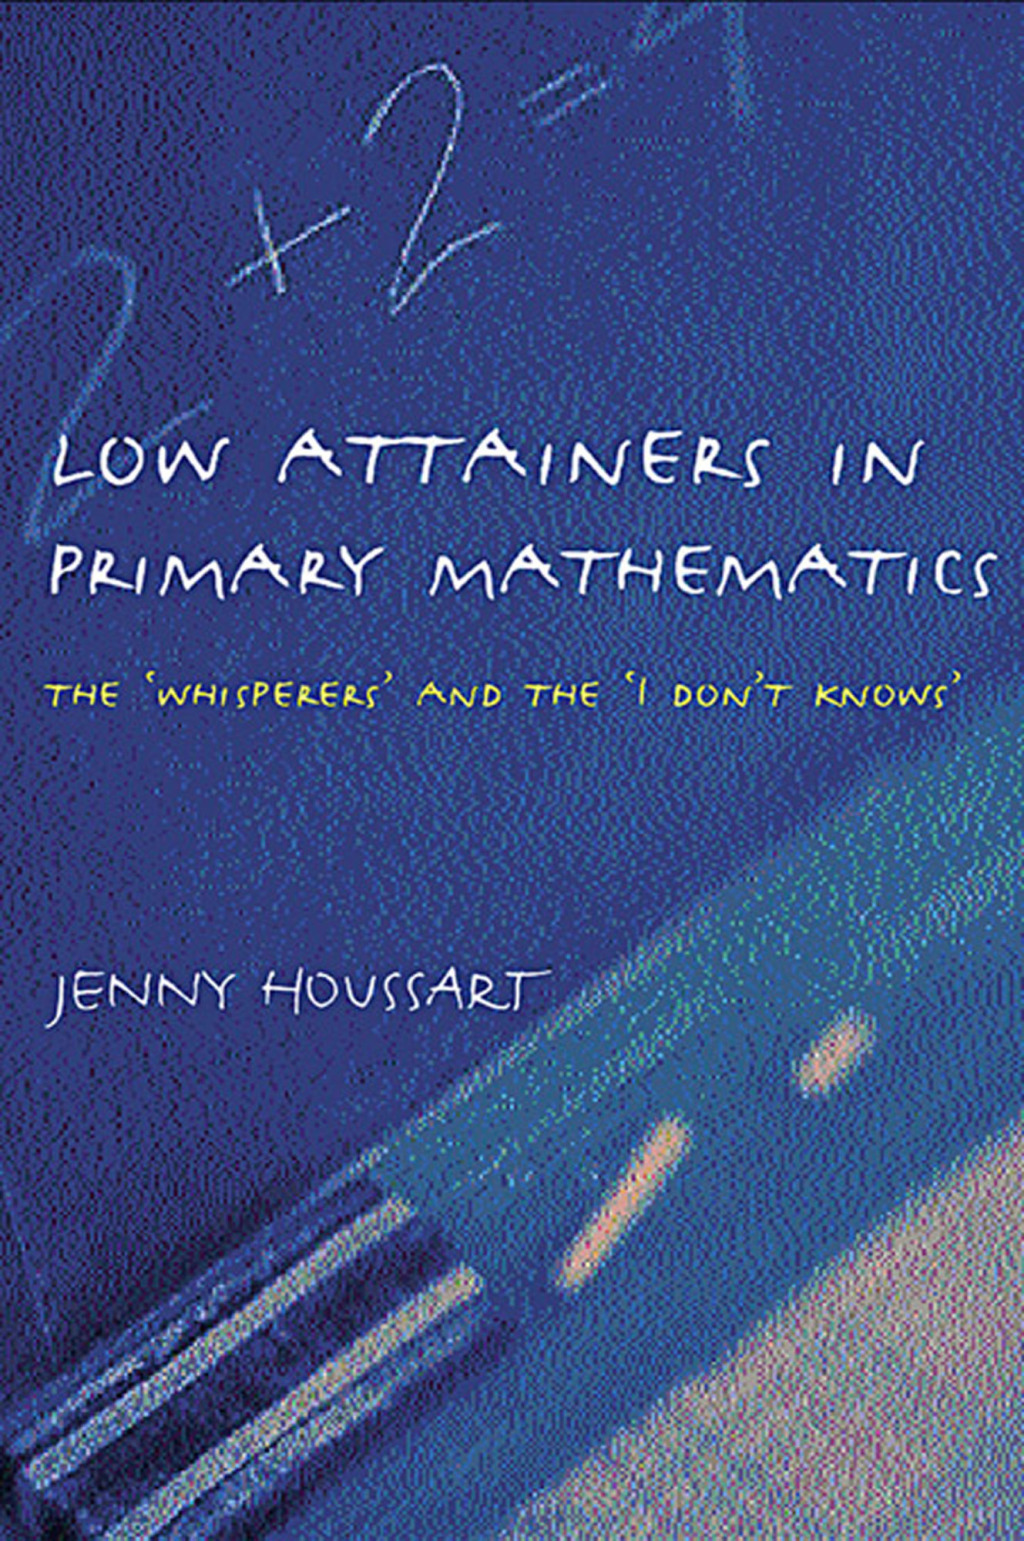 Low Attainers in Primary Mathematics (eBook) - Jenny Houssart